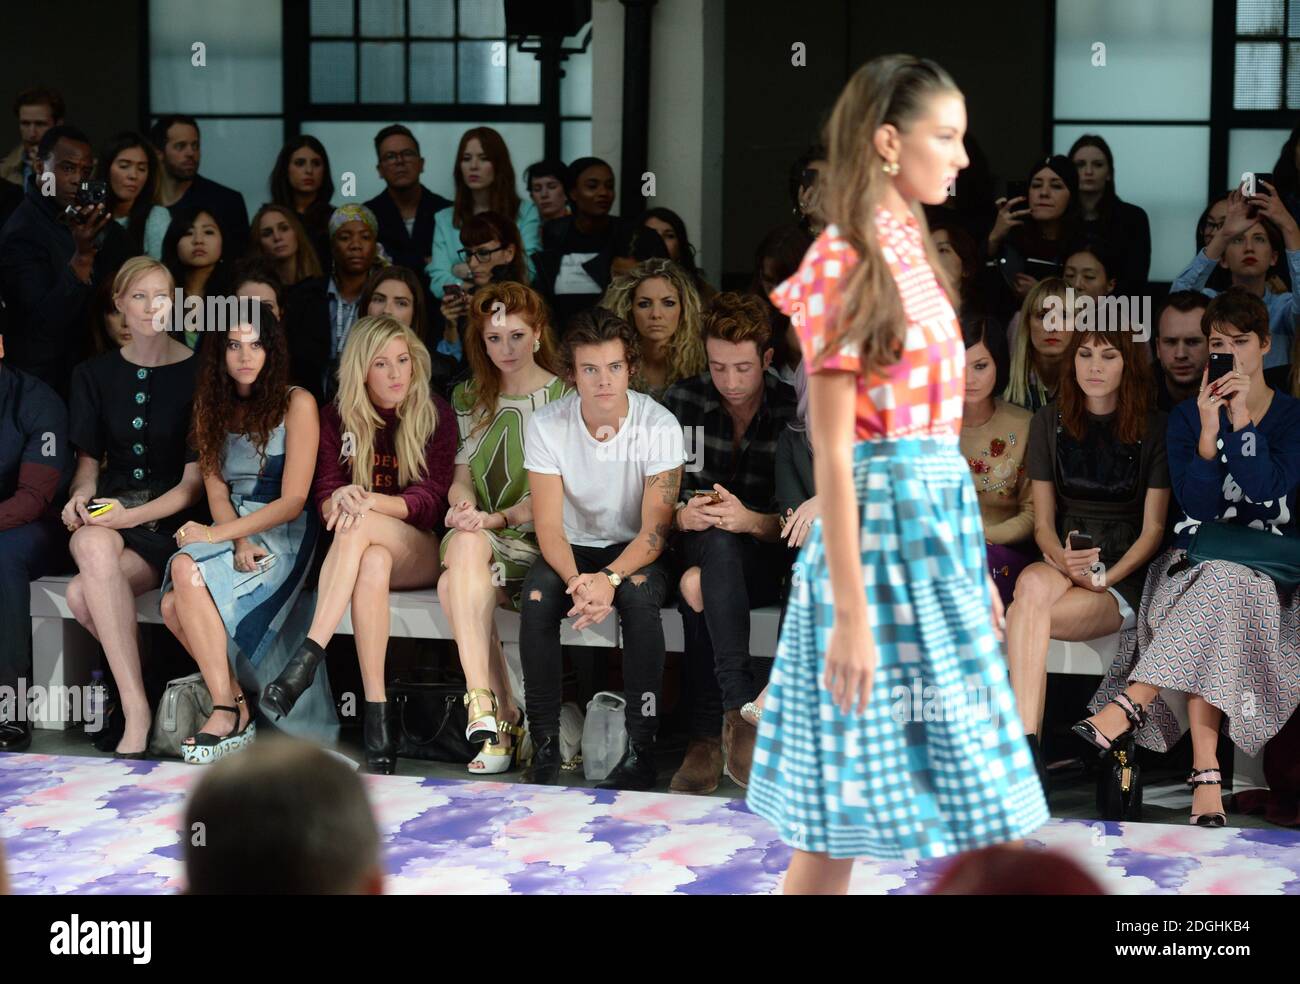 (Left to Right) Eliza Doolittle, Ellie Goulding, Nicola Roberts, Harry Styles, Nick Grimshaw, Leigh Lezark, Alexa Chung and Pixie Geldof attending the House of Holland Catwalk Show Catwalk Show, part of London Fashion Week, Spring Summer 2014, Goldsmiths Hall. Stock Photo